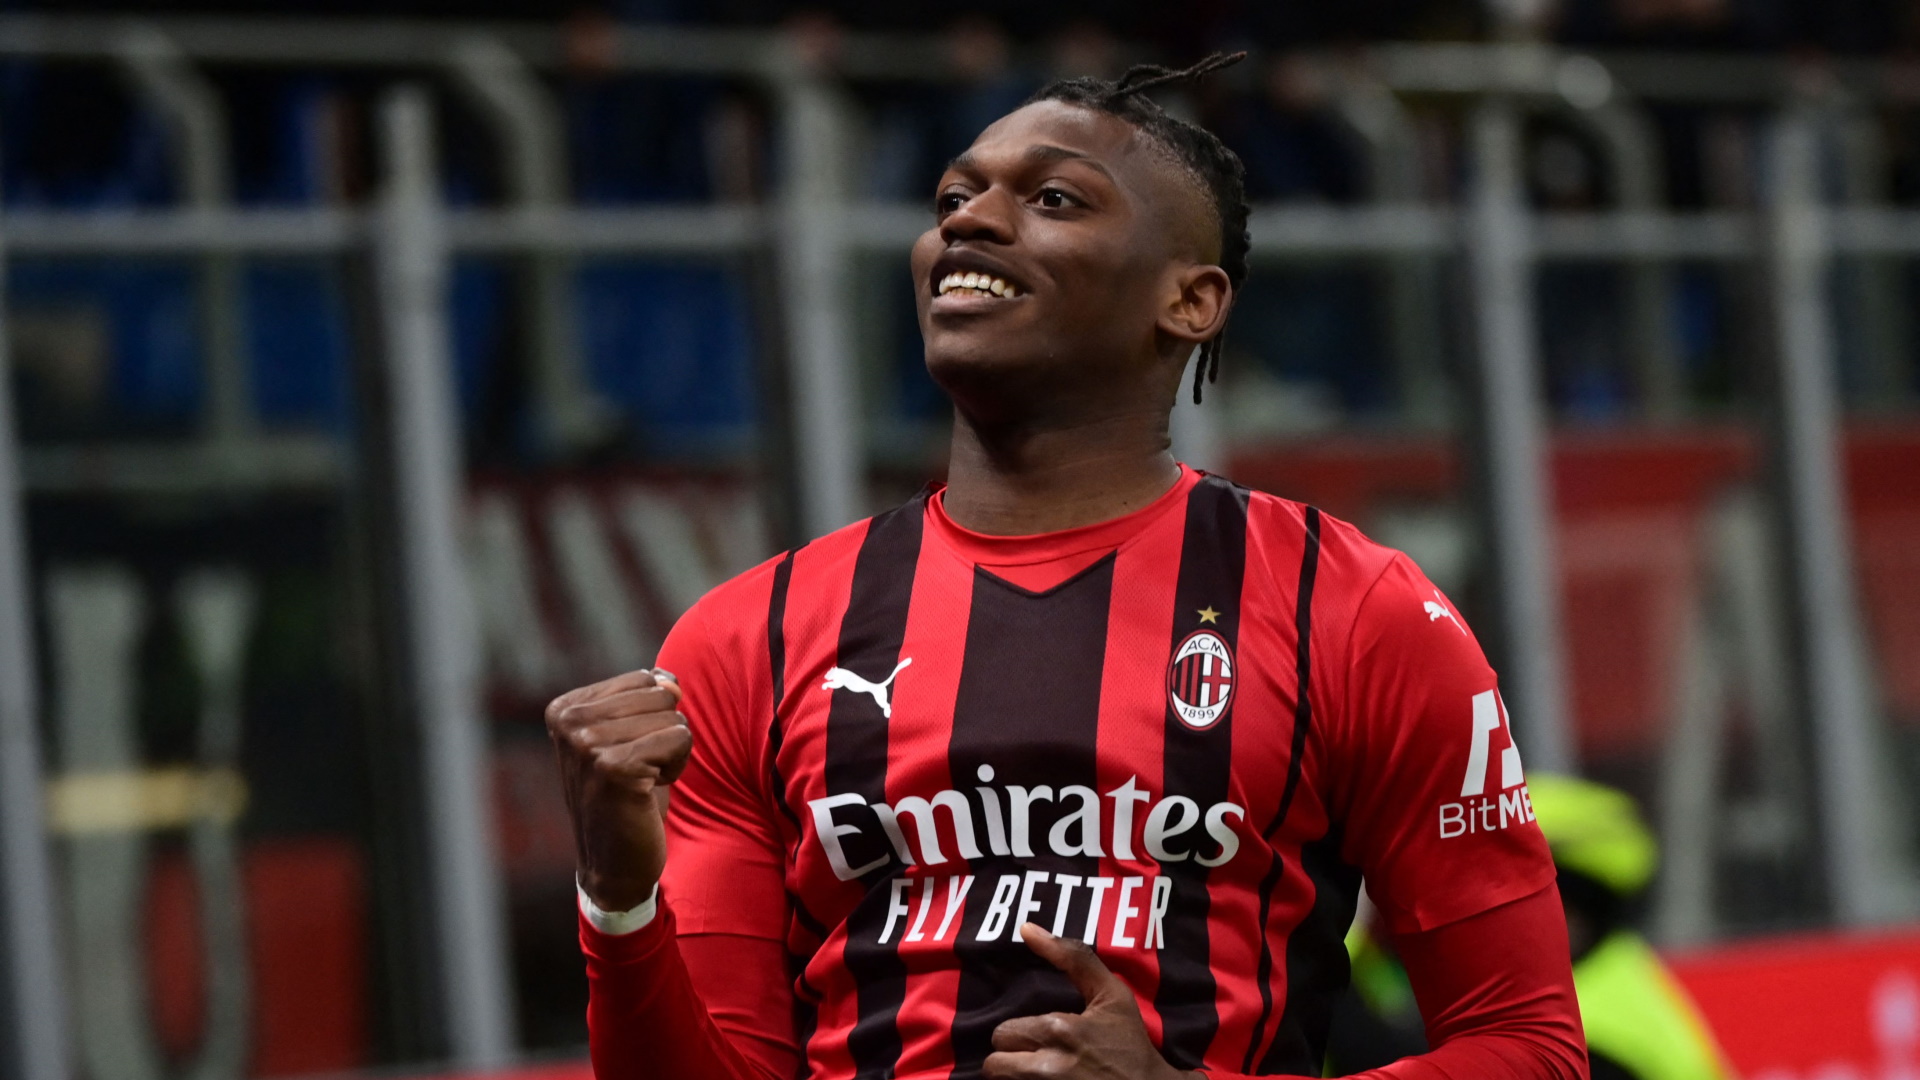 It was not just points that Milan lost against Lecce, with Rafael Leao and Calabria also picking up knocks that is bound to lay them off for a short period.